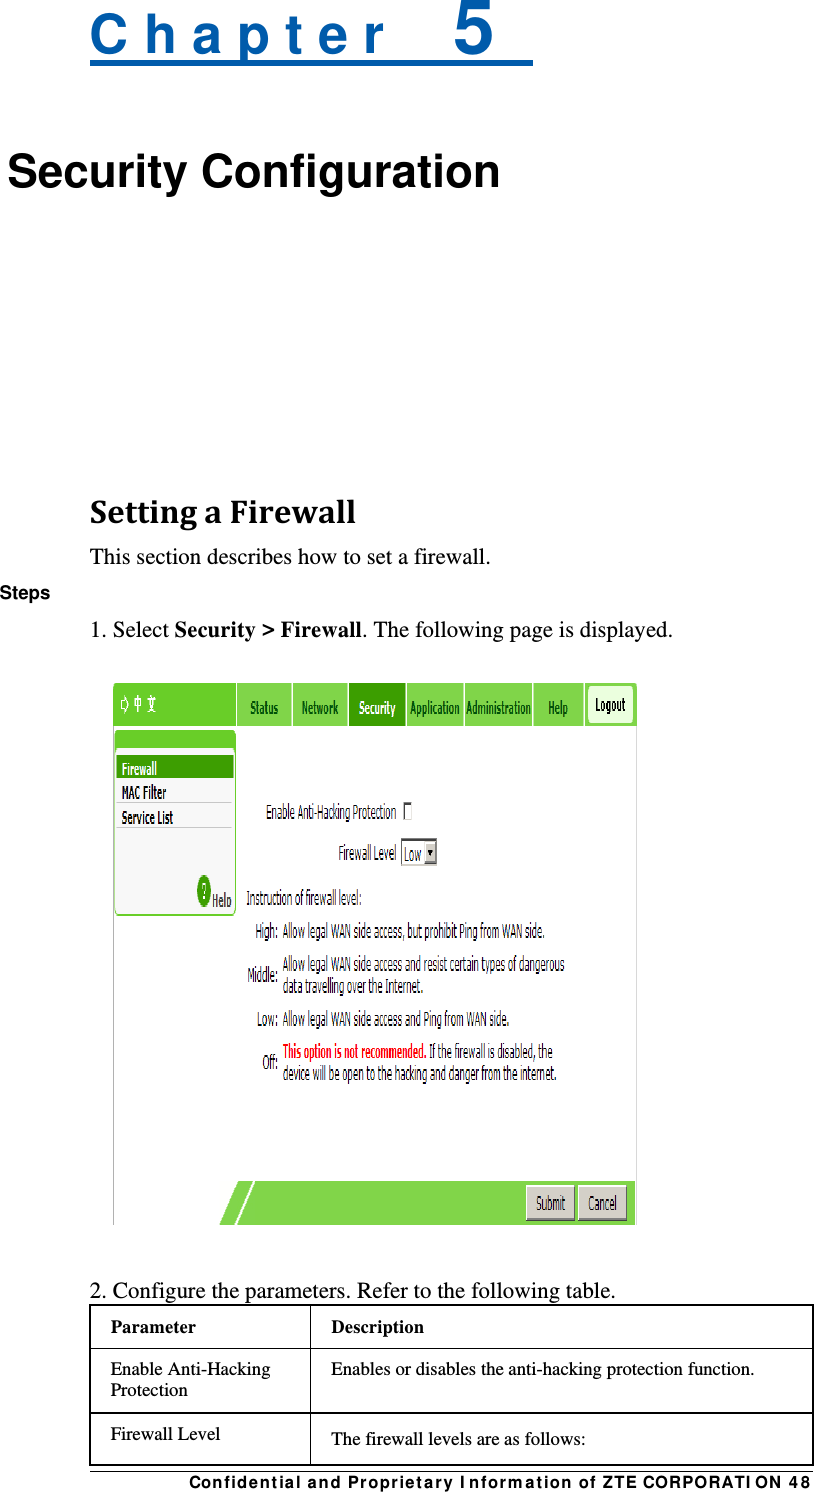 Con fidentia l and Propriet a ry I nform a t ion of ZTE CORPORATI ON  4 8 C h a p t e r    5   Security Configuration    SettingaFirewallThis section describes how to set a firewall. Steps 1. Select Security &gt; Firewall. The following page is displayed.    2. Configure the parameters. Refer to the following table. Parameter Description Enable Anti-Hacking Protection Enables or disables the anti-hacking protection function. Firewall Level  The firewall levels are as follows: 